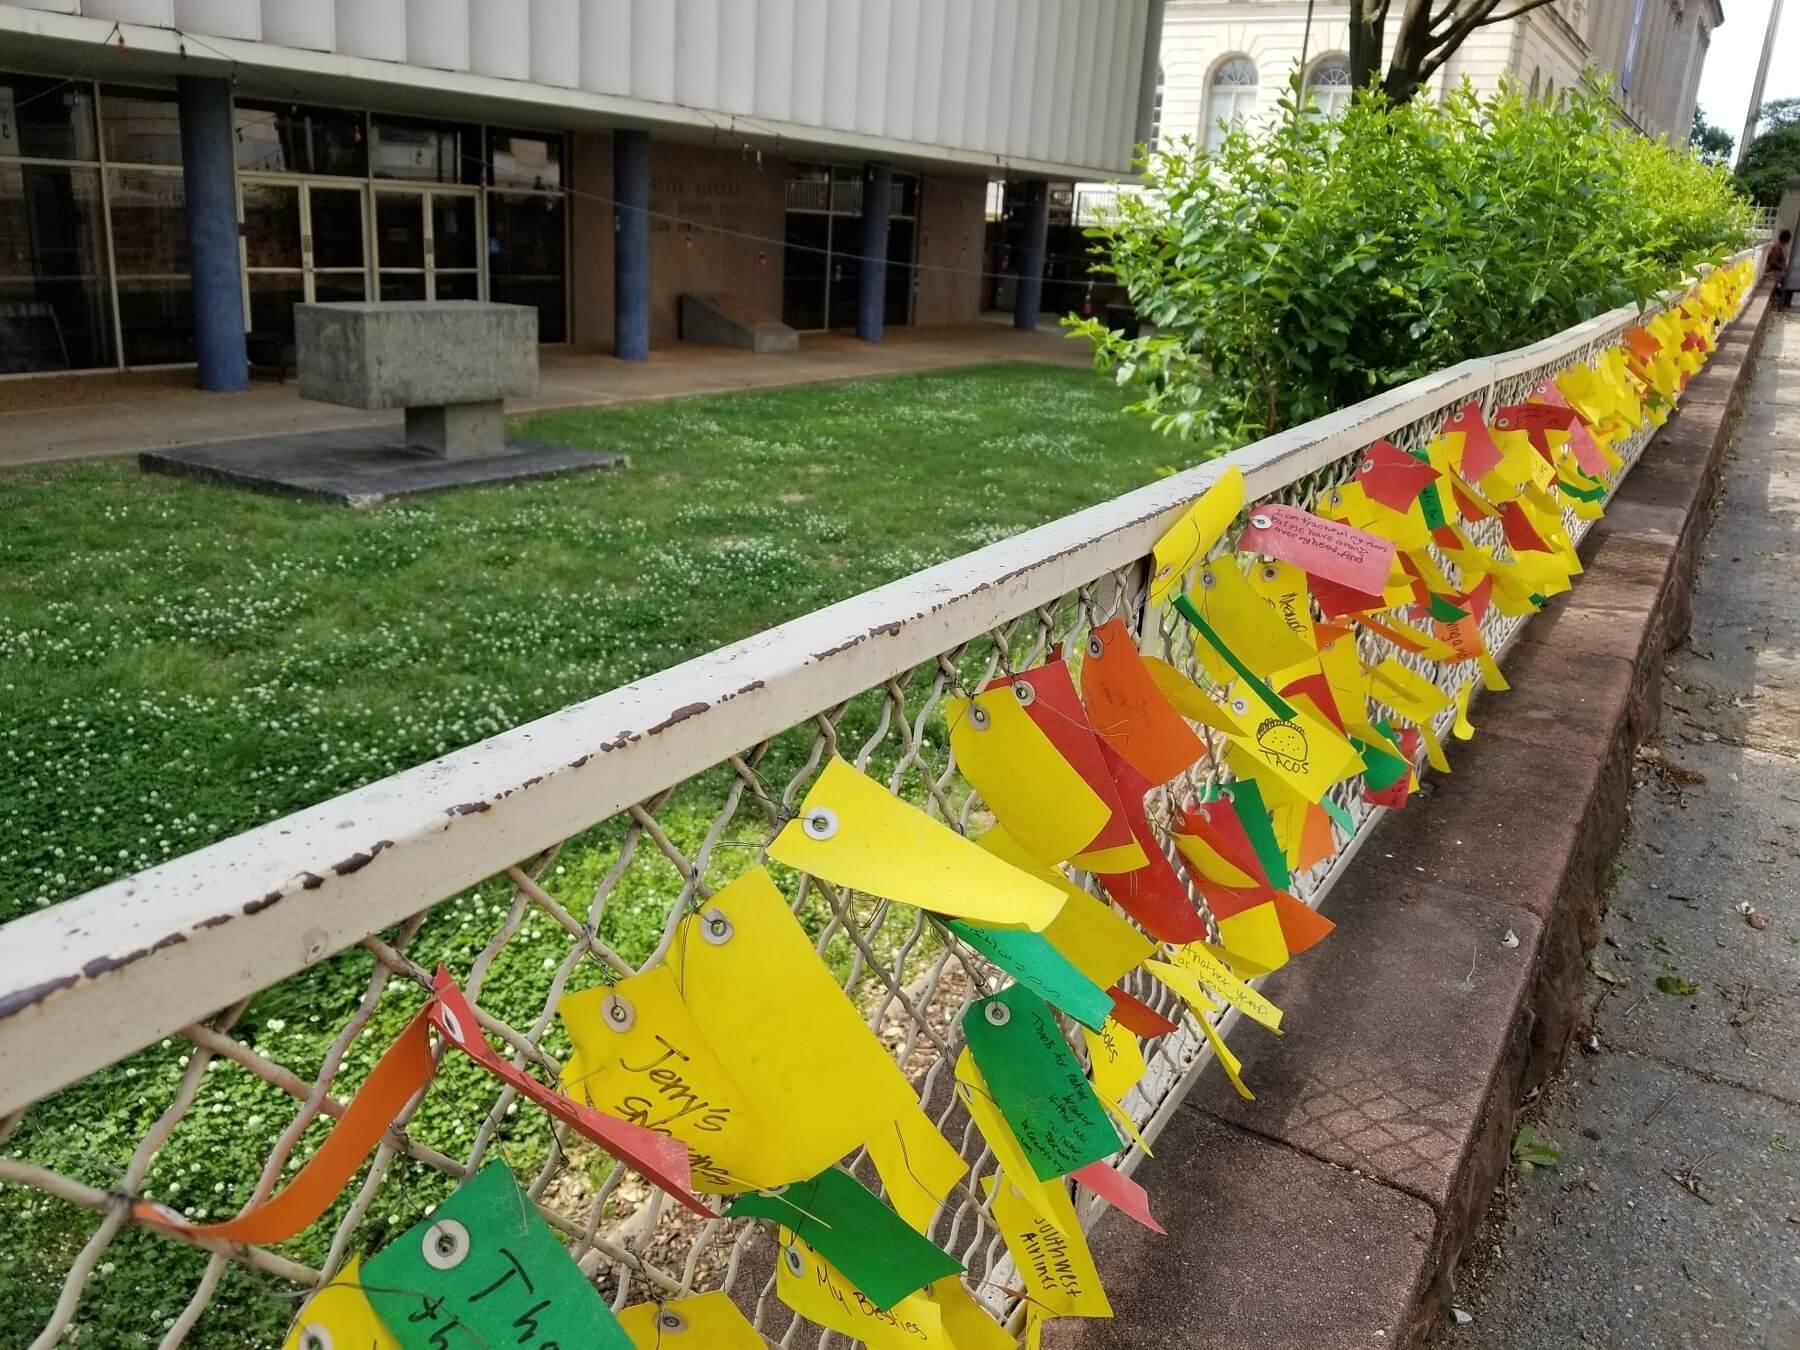 Fence outside of Cossitt Library decorated with gratitude notes.